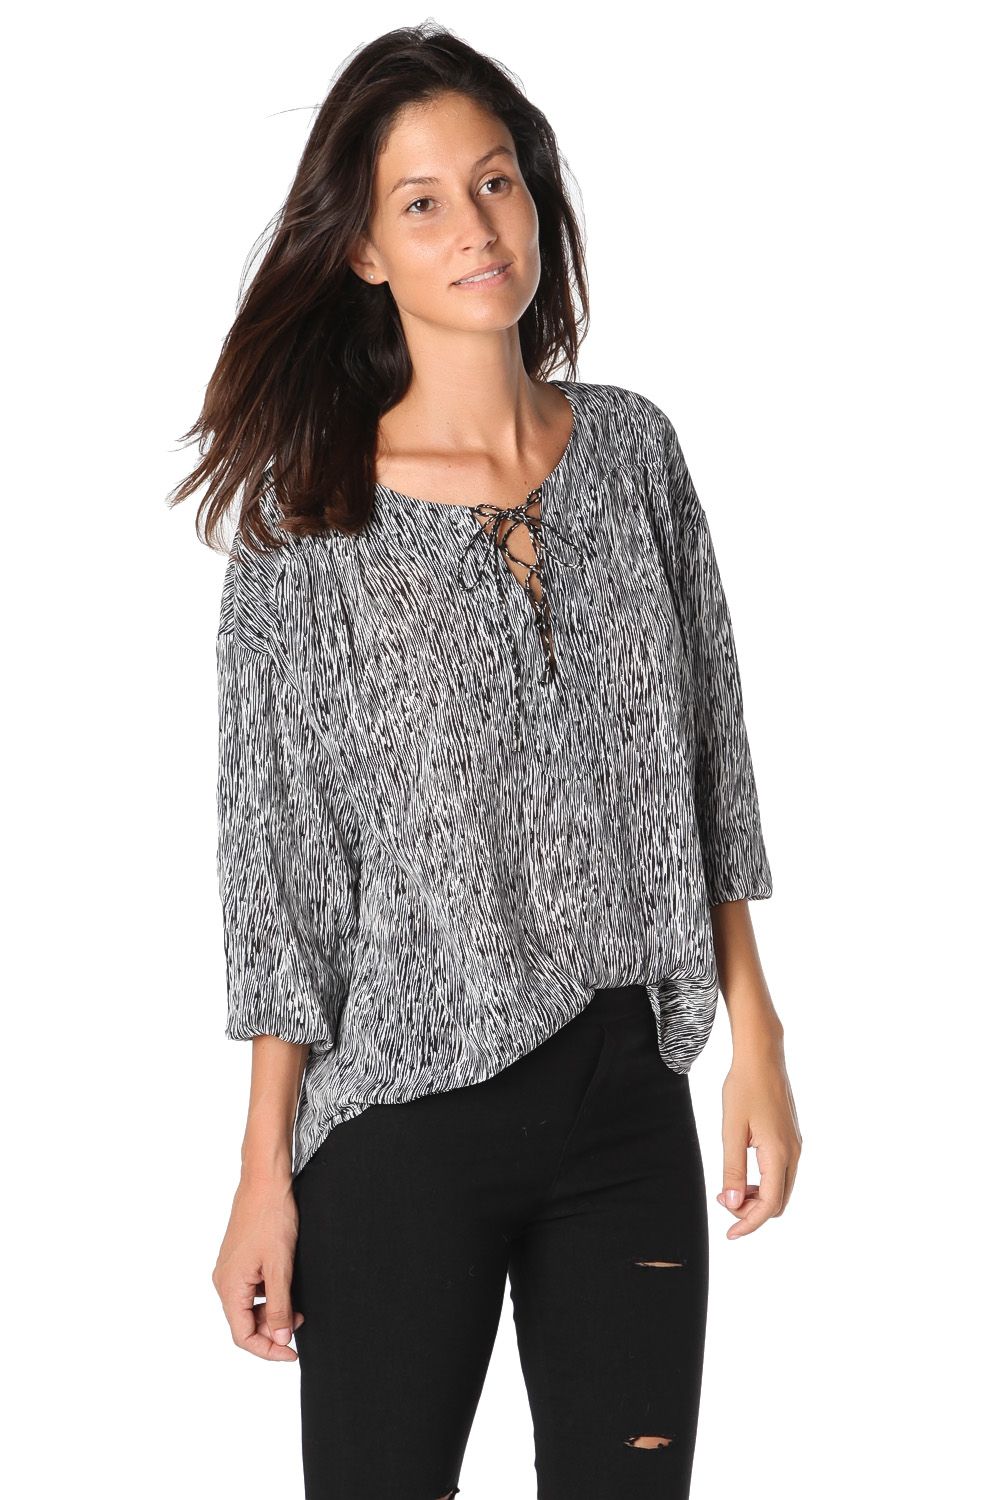 Q2 Black lace up shirt with fleck 